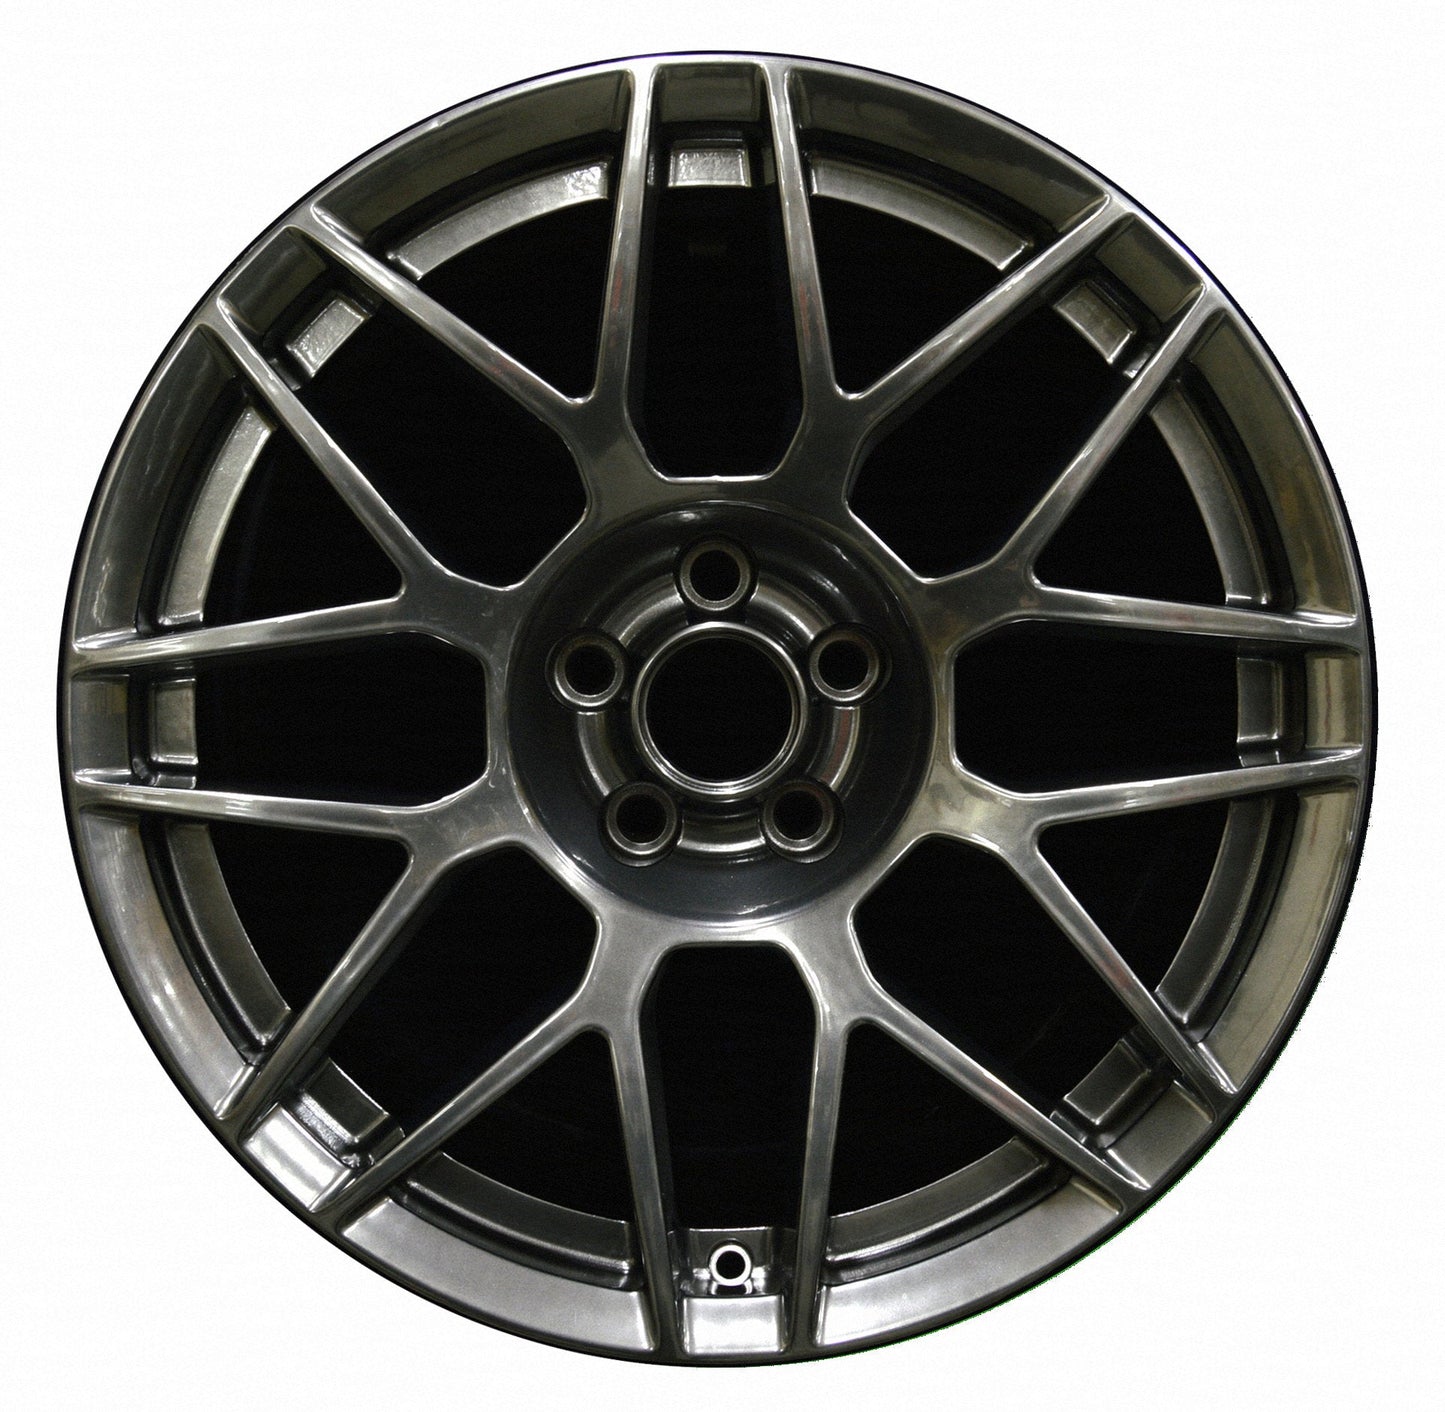 Ford Mustang  2011, 2012 Factory OEM Car Wheel Size 20x9.5 Alloy WAO.3866RE.HYPV3.FF